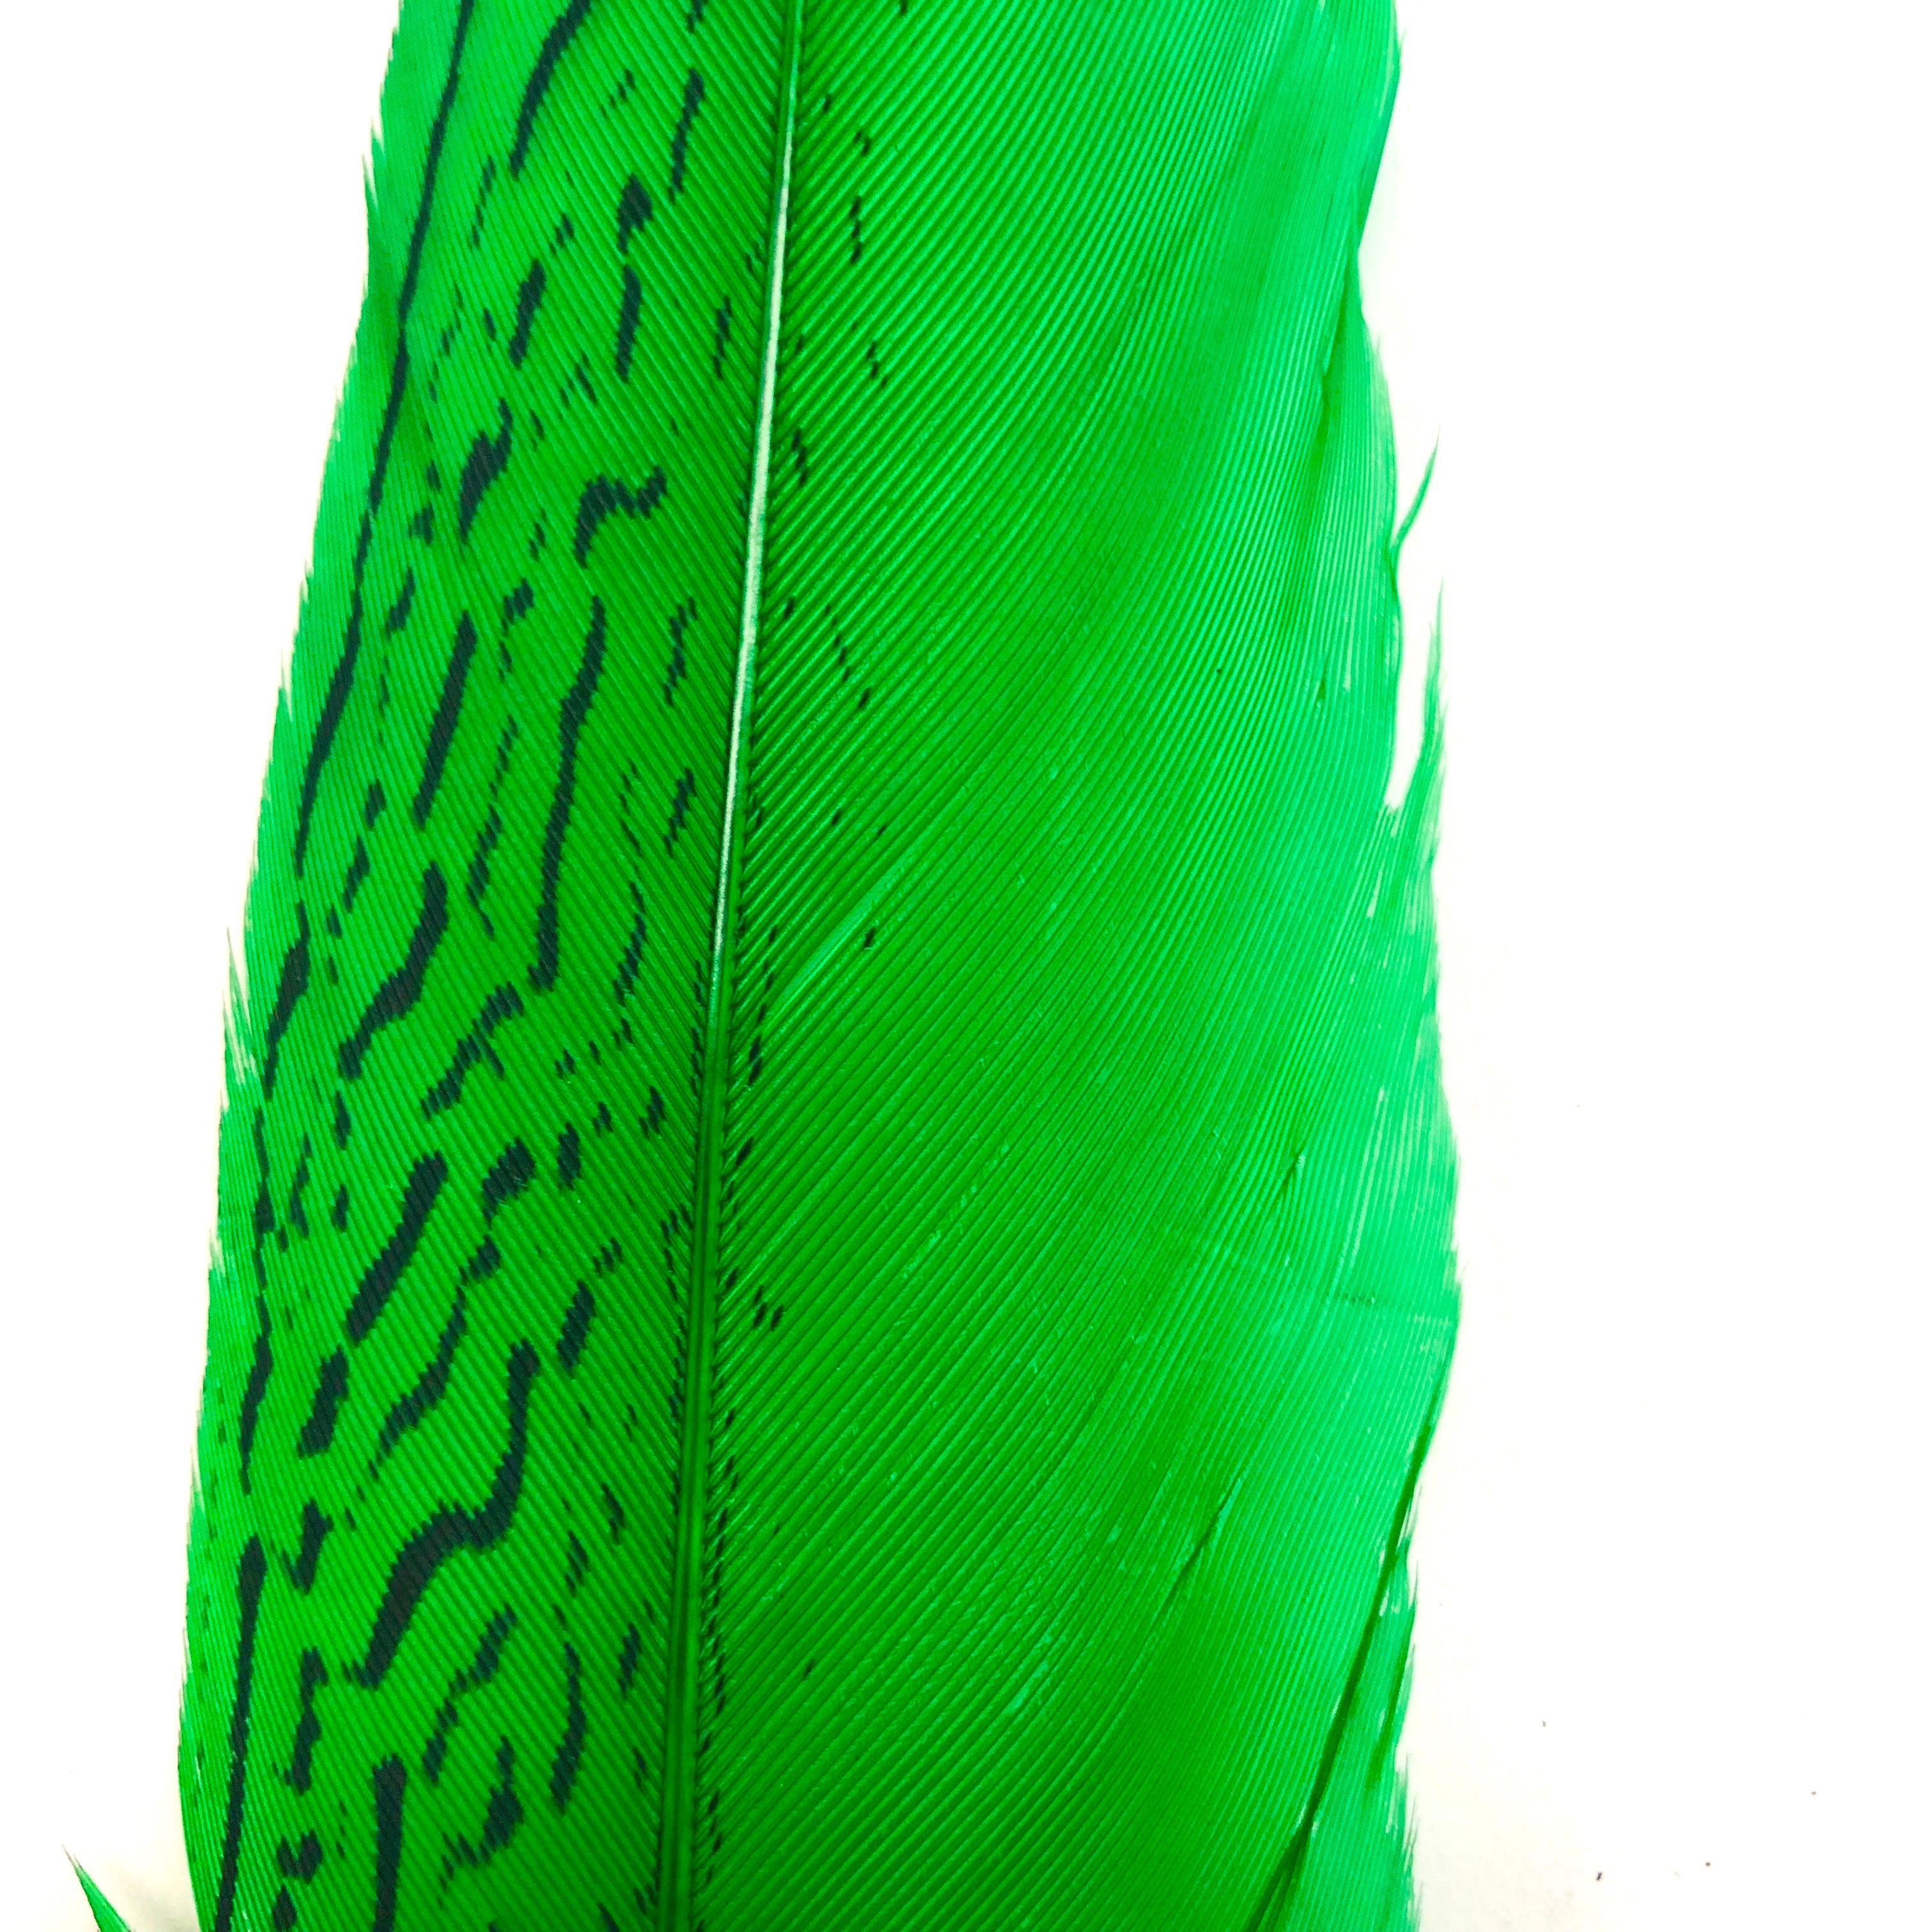 6" to 10" Silver Pheasant Tail Feather - Green